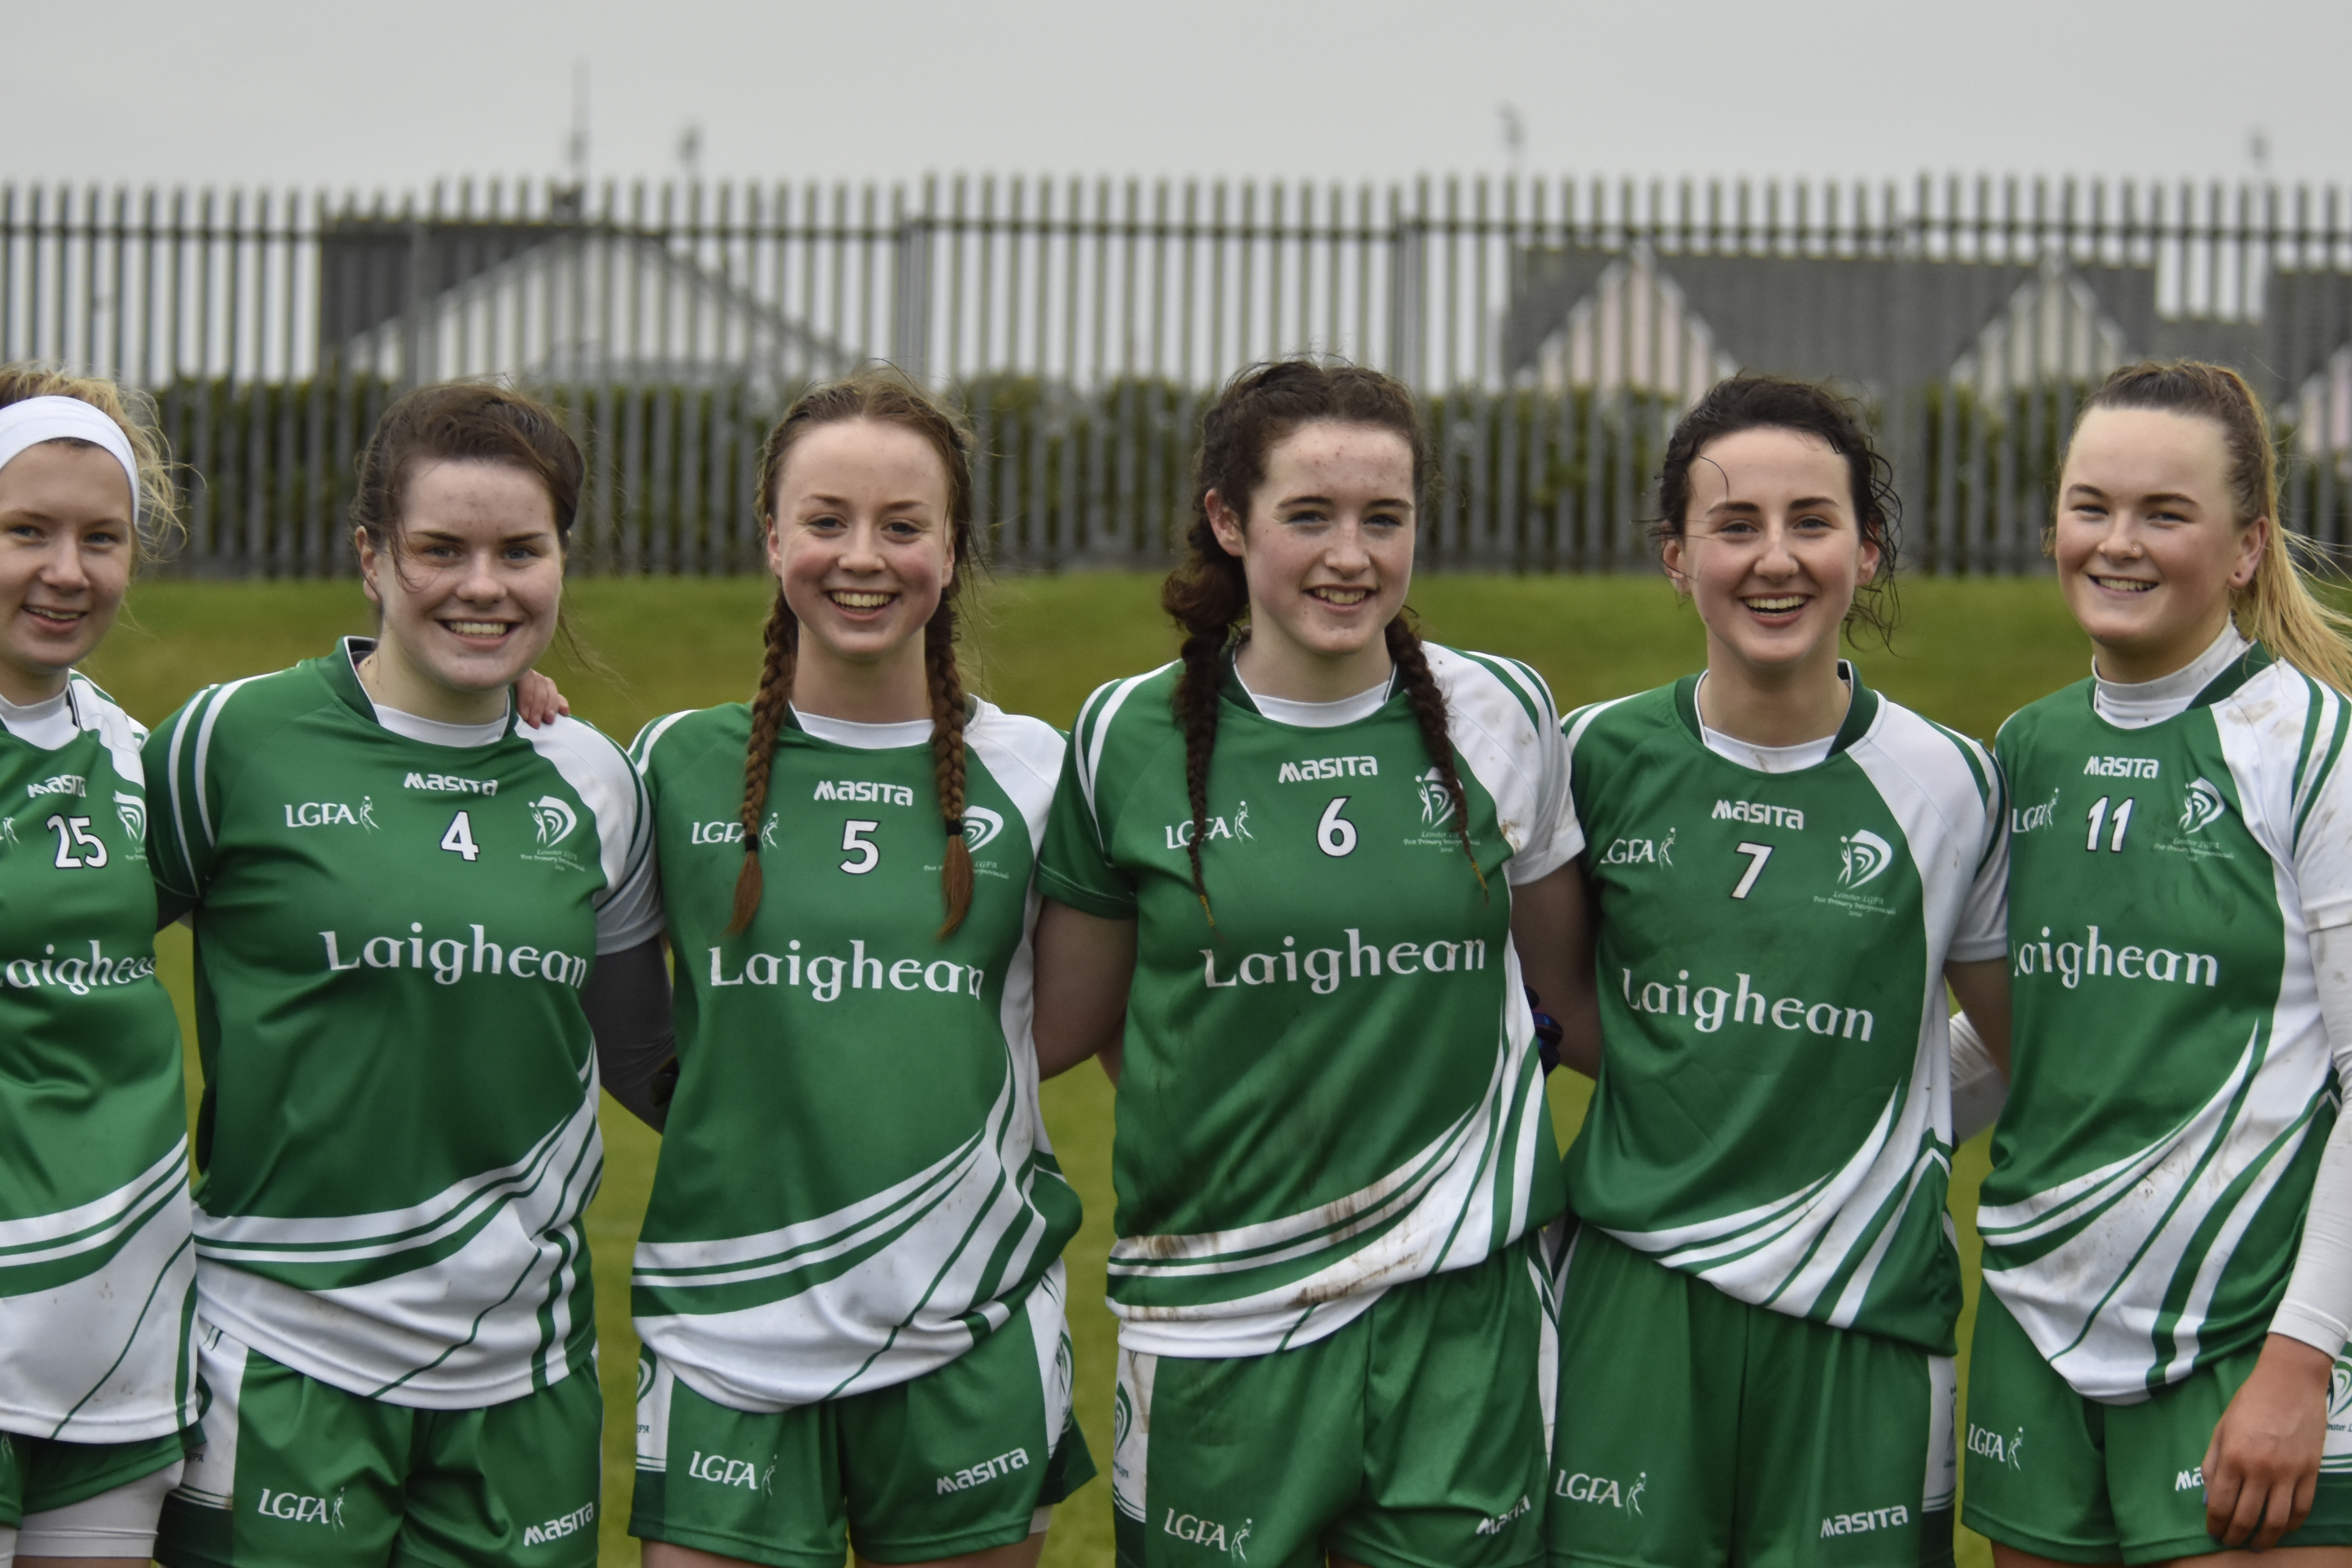 Meath representatives on the Leinster PPS Interprovincials team from L to R; Kelsey Nesbitt, Hannah Heskin, Aoibhín Cleary, Marion Farrelly, Niamh Cassidy and Vikki Wall